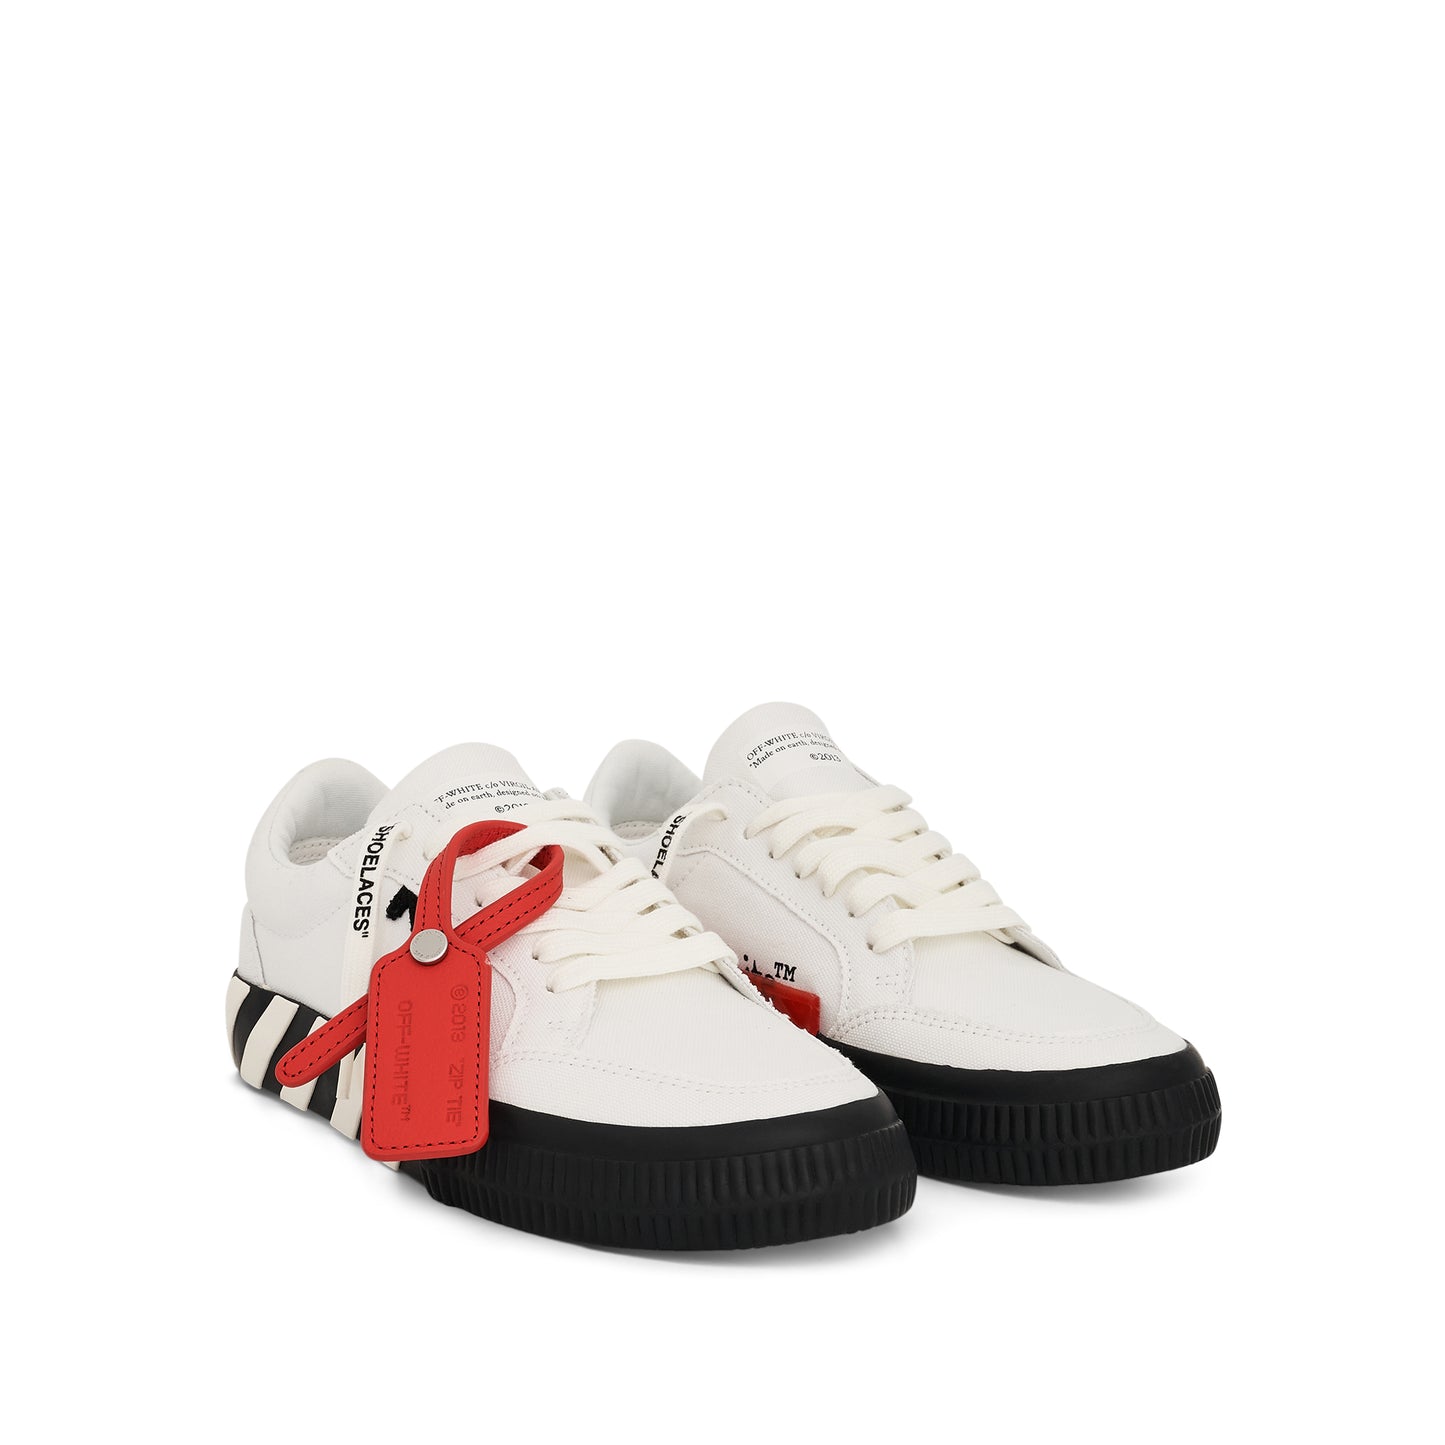 Low Vulcanized Canvas Sneakers in White/Black Colour